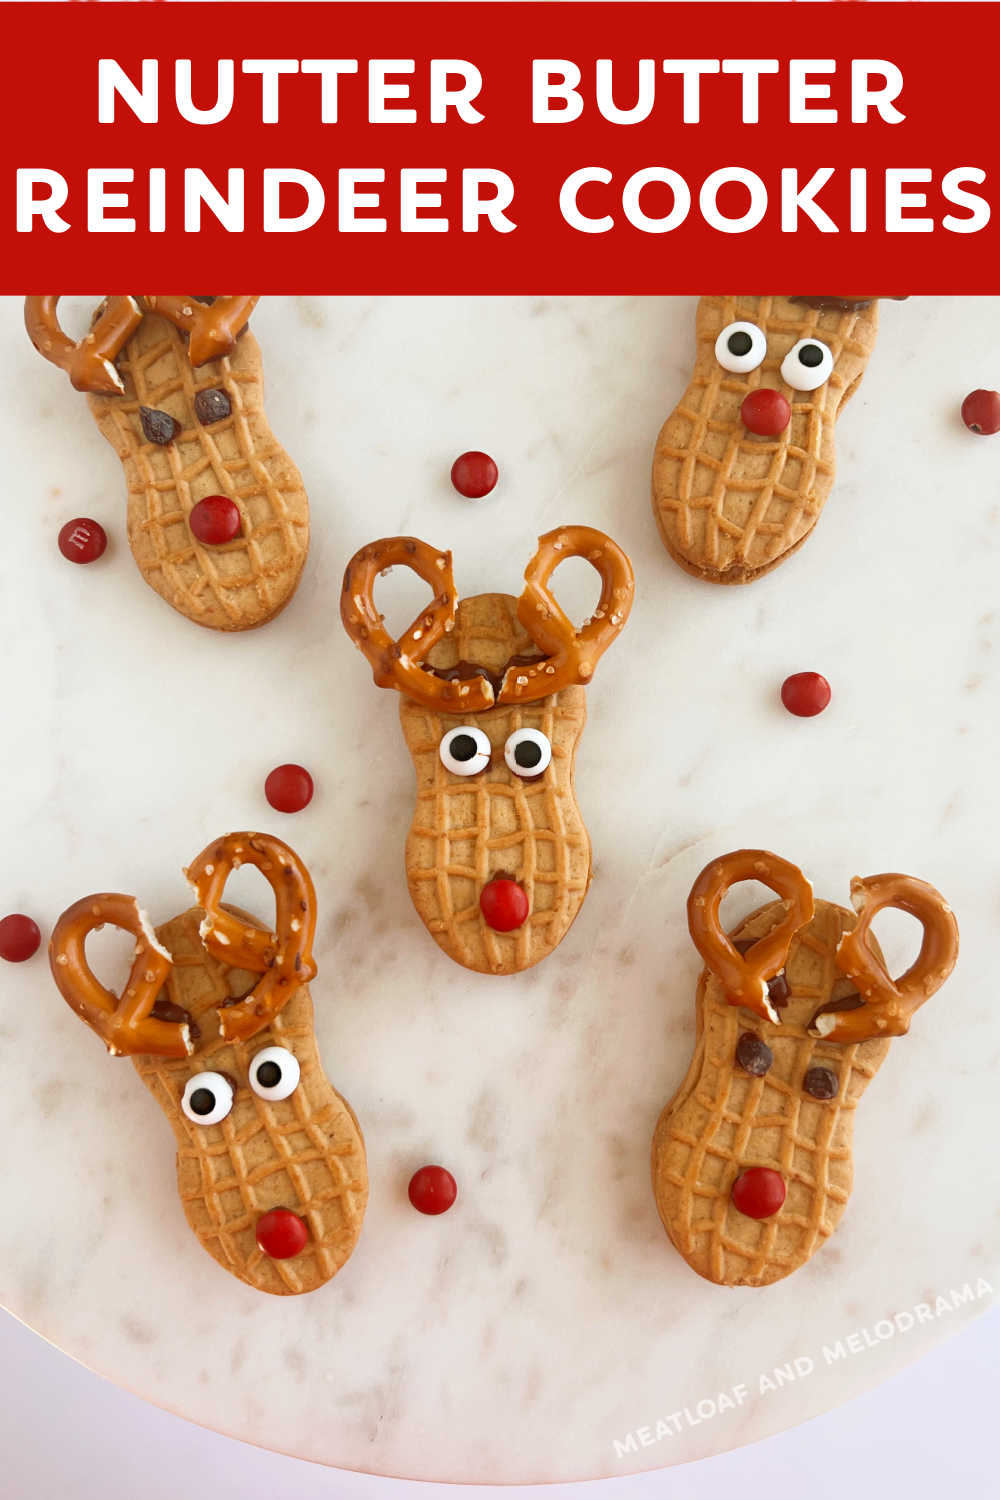 Nutter Butter Reindeer Cookies are easy no bake Christmas treats made with peanut butter cookies, pretzels and a few simple ingredients. These adorable reindeer cookies are perfect for holiday parties and cookie trays throughout the season! via @meamel